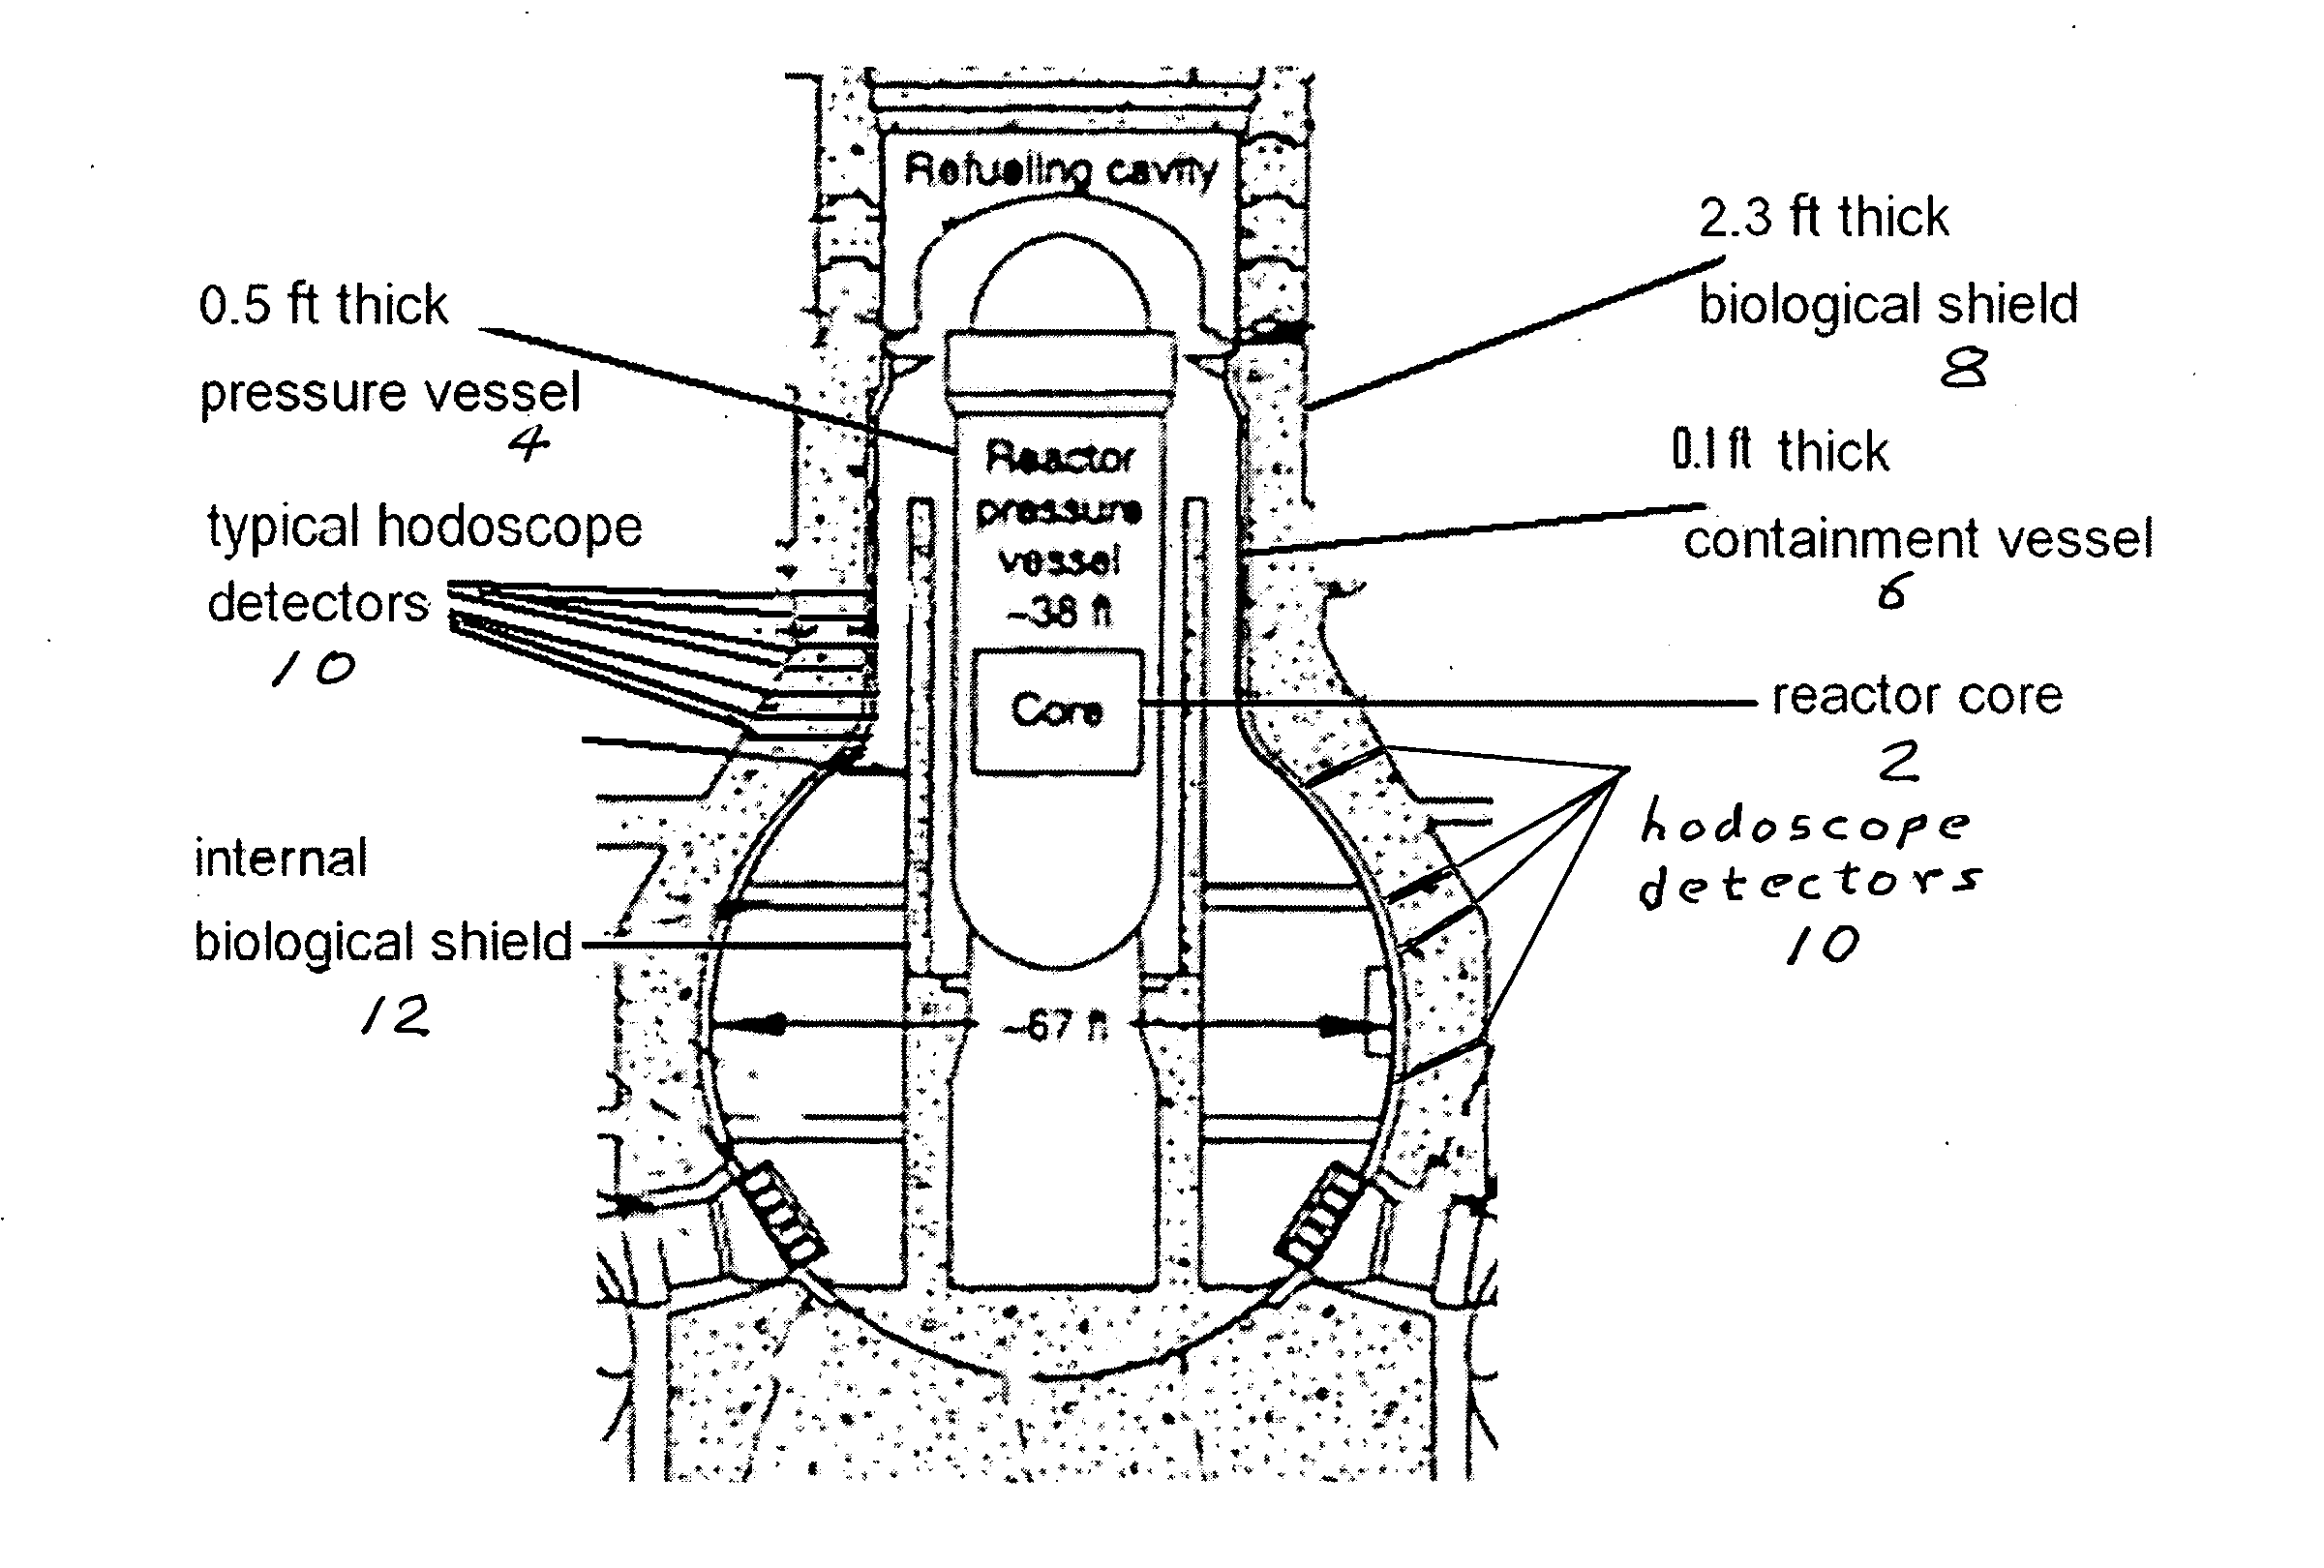 Radiation-monitoring diagnostic hodoscope system for nuclear-power reactors